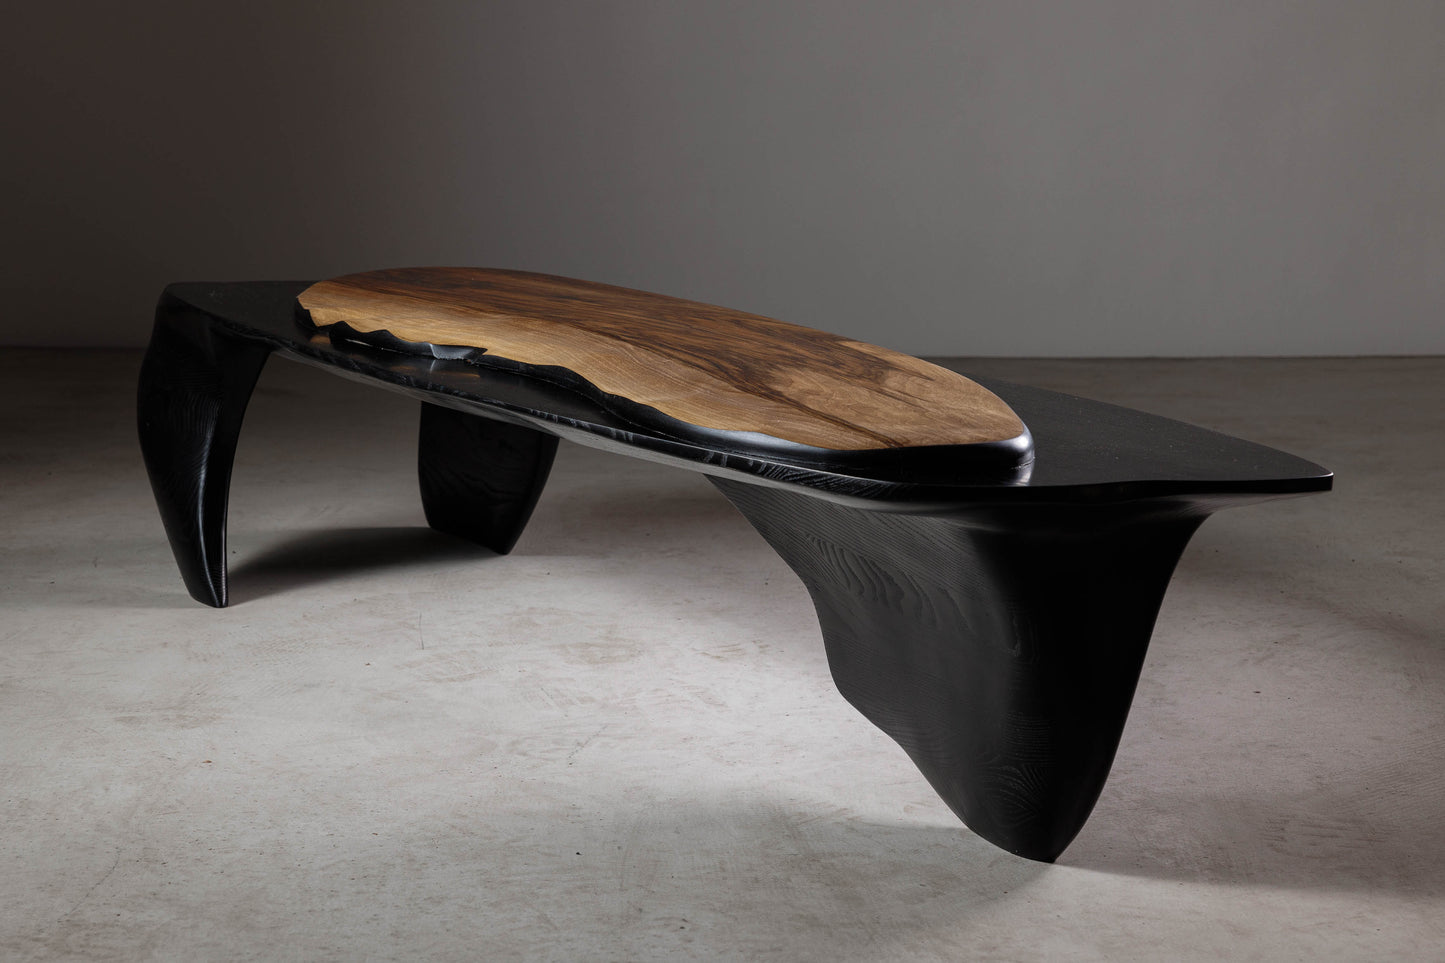 Sculptural Walnut Coffee Table EM110 Part Of Erosio Collection | Perspective image from the front showing the hand-carved ripples in the walnut slab.